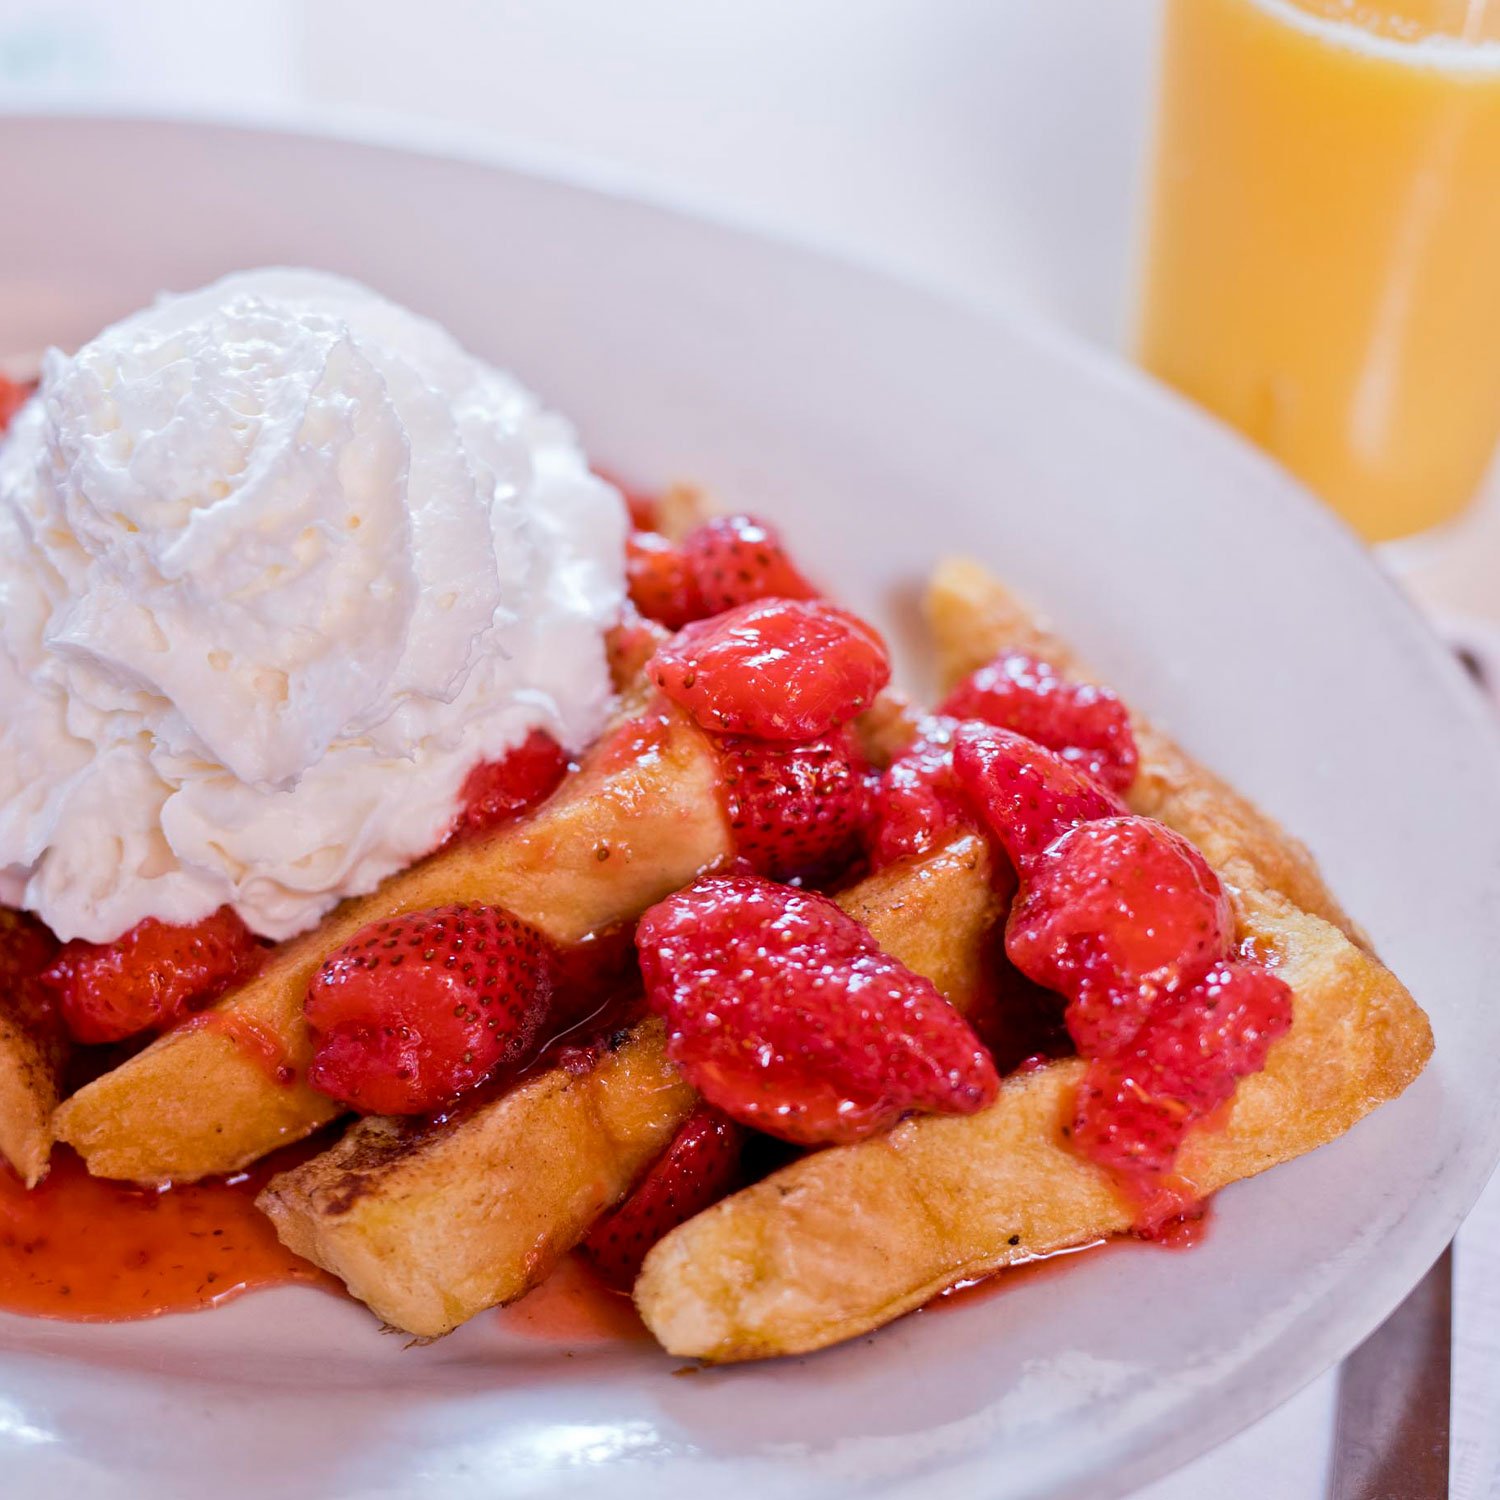  several slices of belgian waffles drizzled with sweet strawberries and whipped cream  